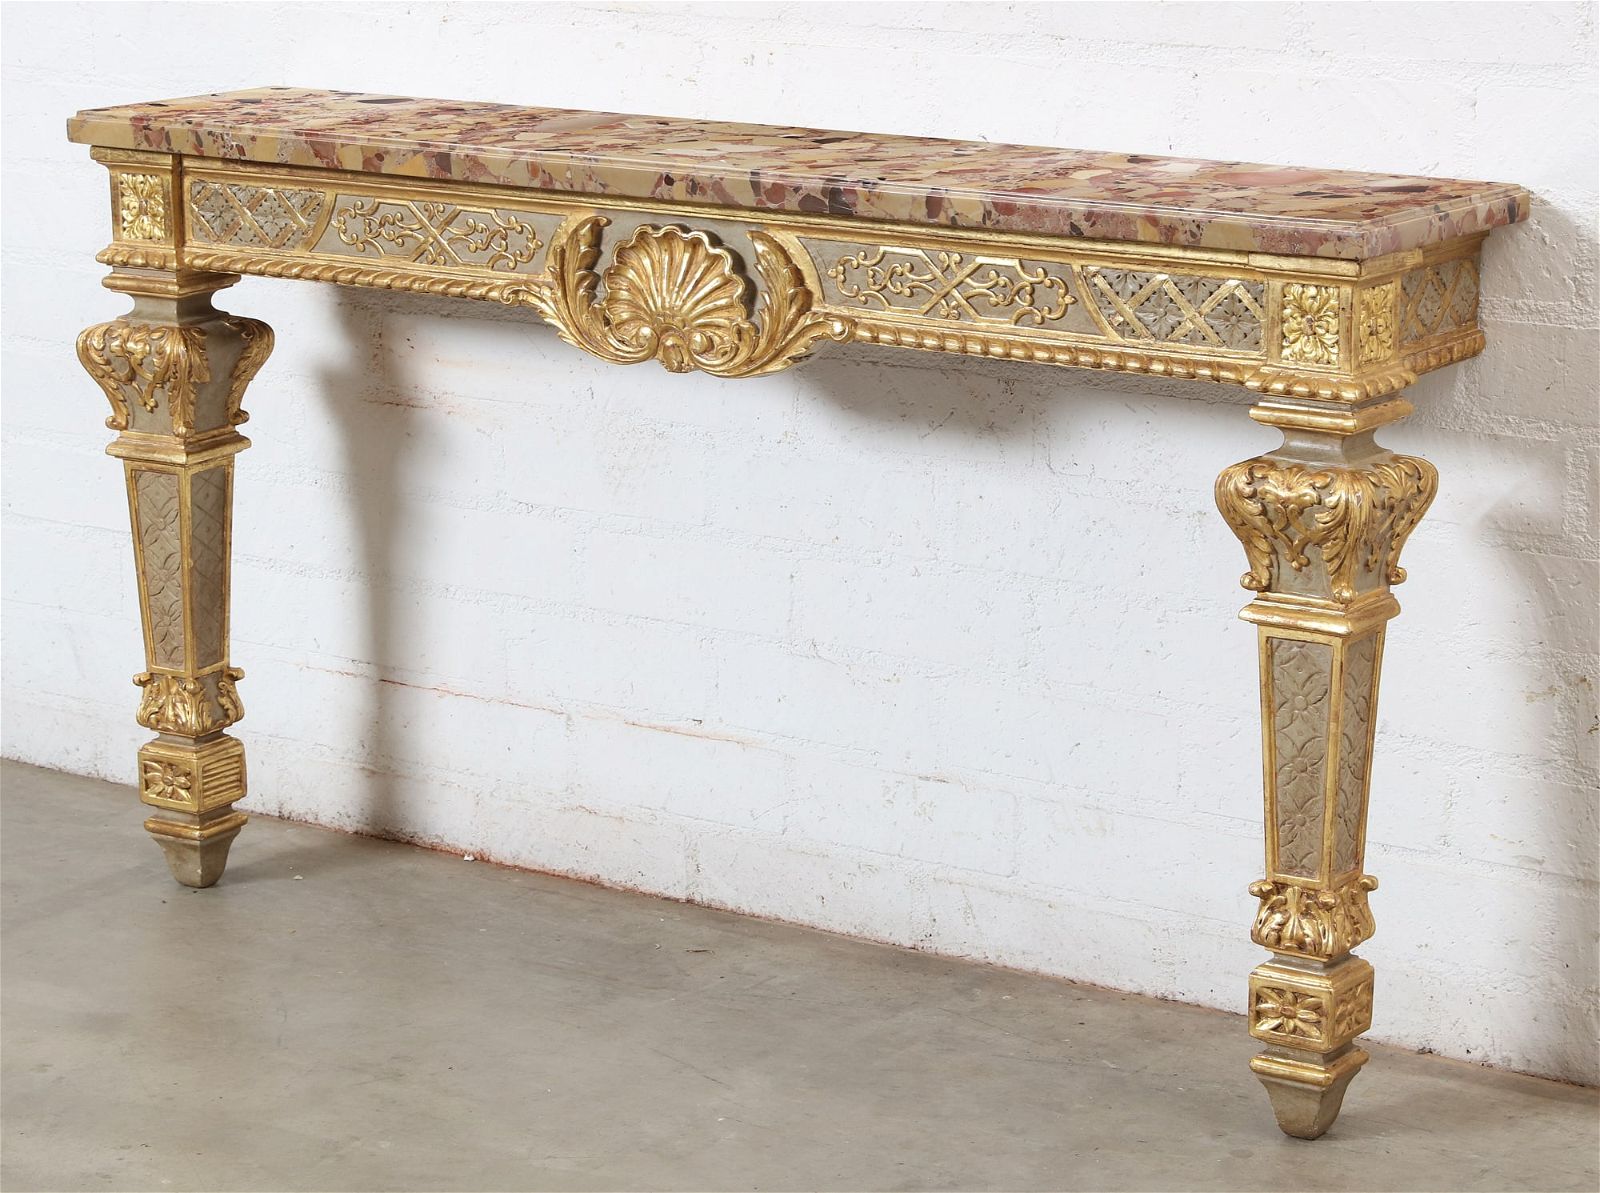 A LOUIS XIV STYLE PAINTED CONSOLEA